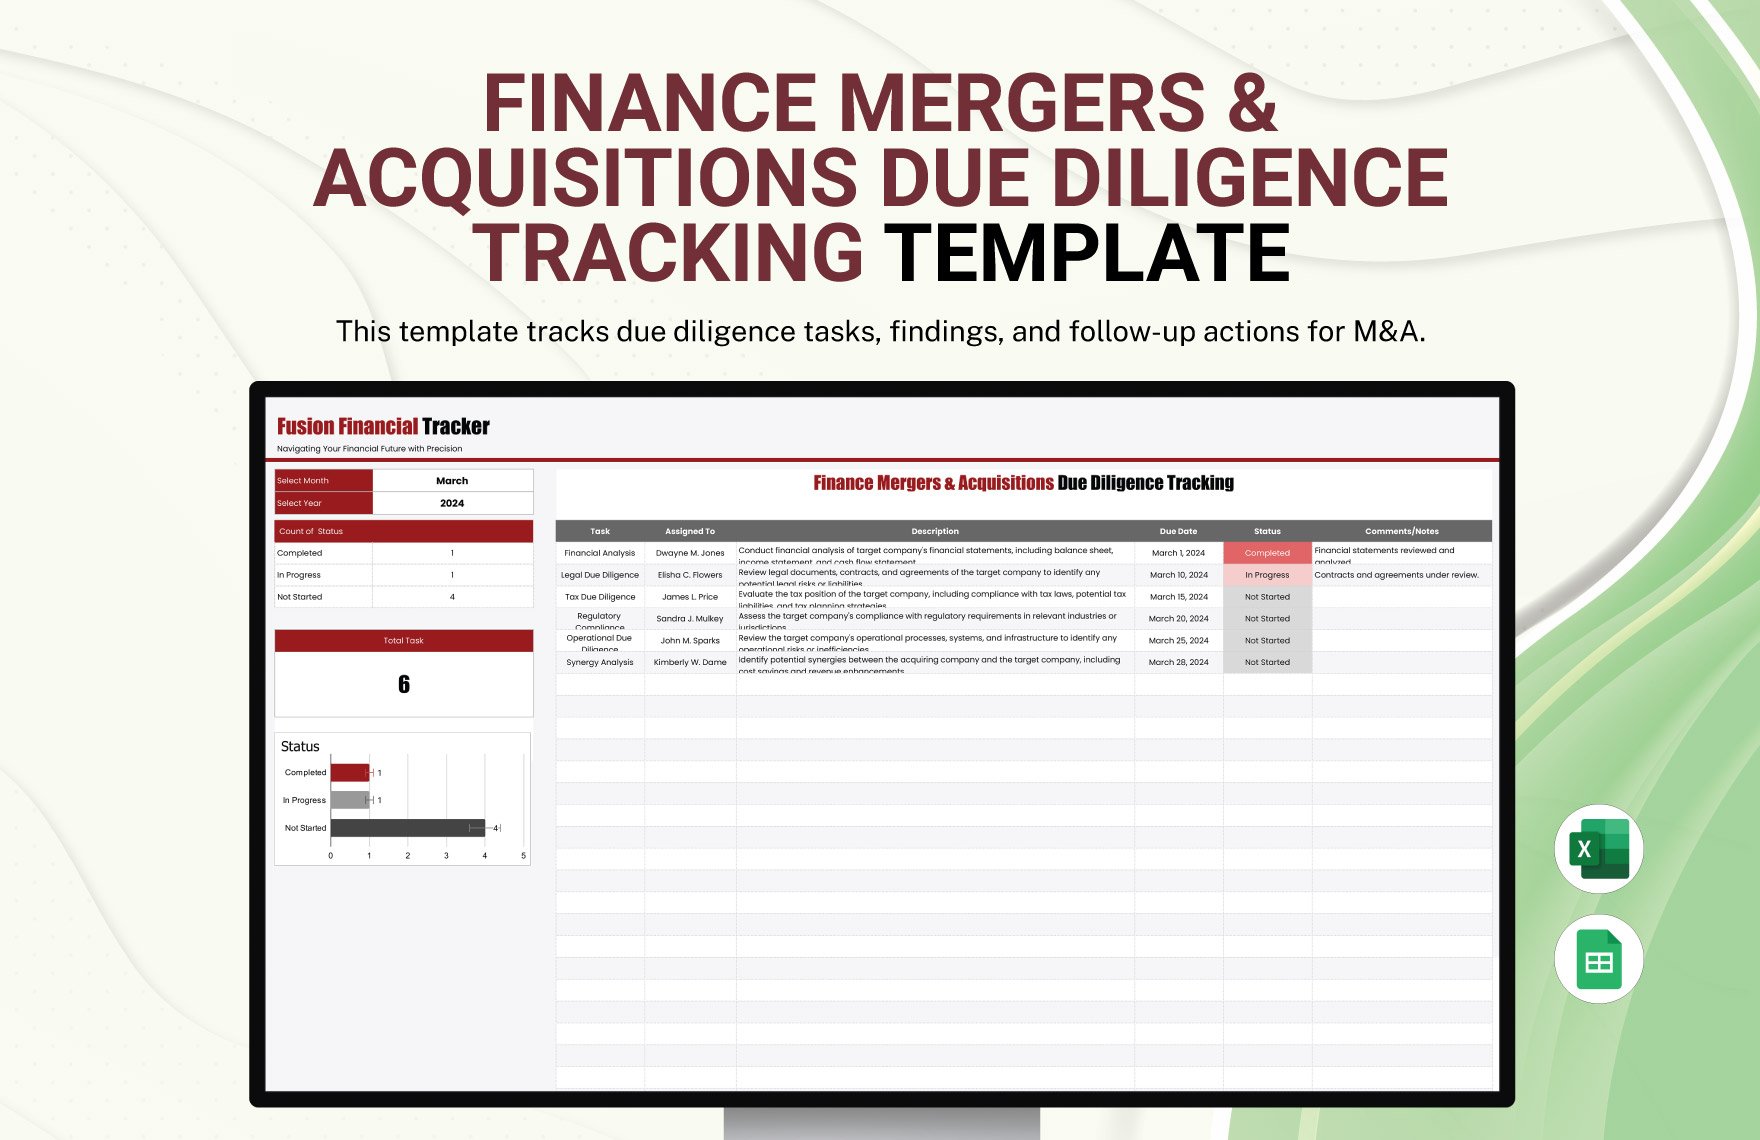 Finance Mergers & Acquisitions Due Diligence Tracking Template in Excel, Google Sheets